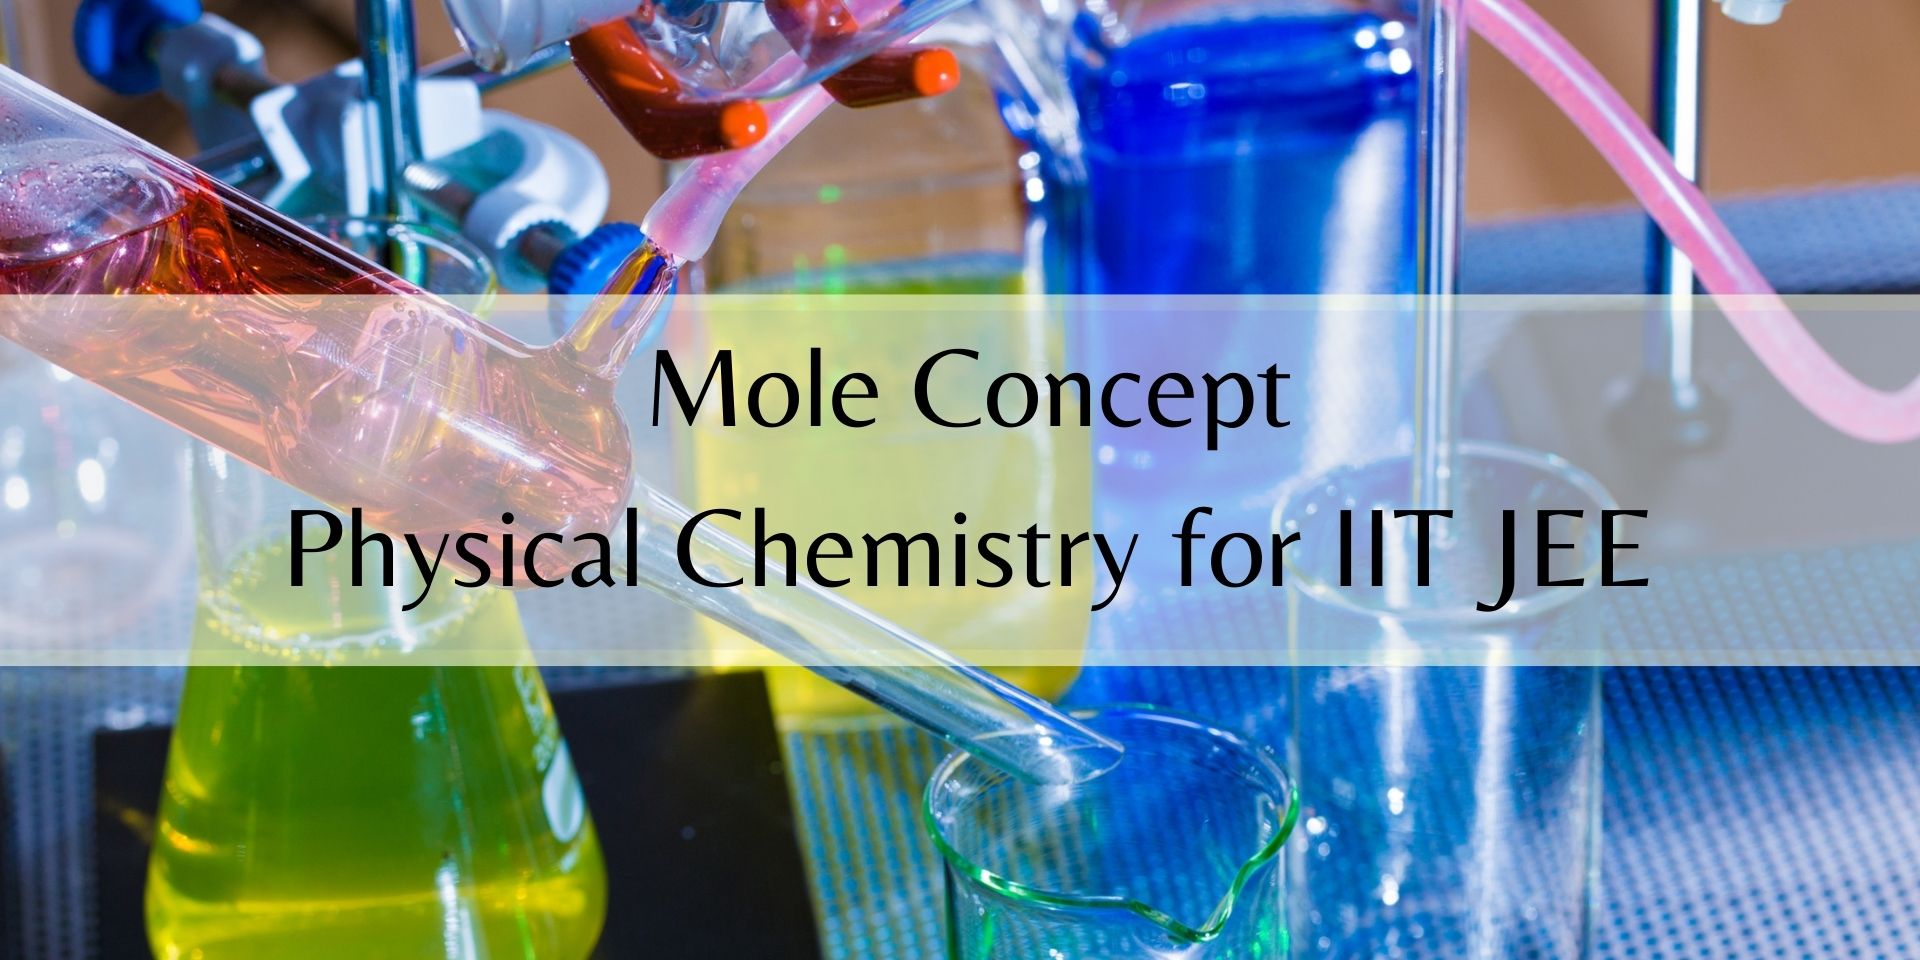 IIT JEE Physical Chemistry: Part 1 - Mole Concept